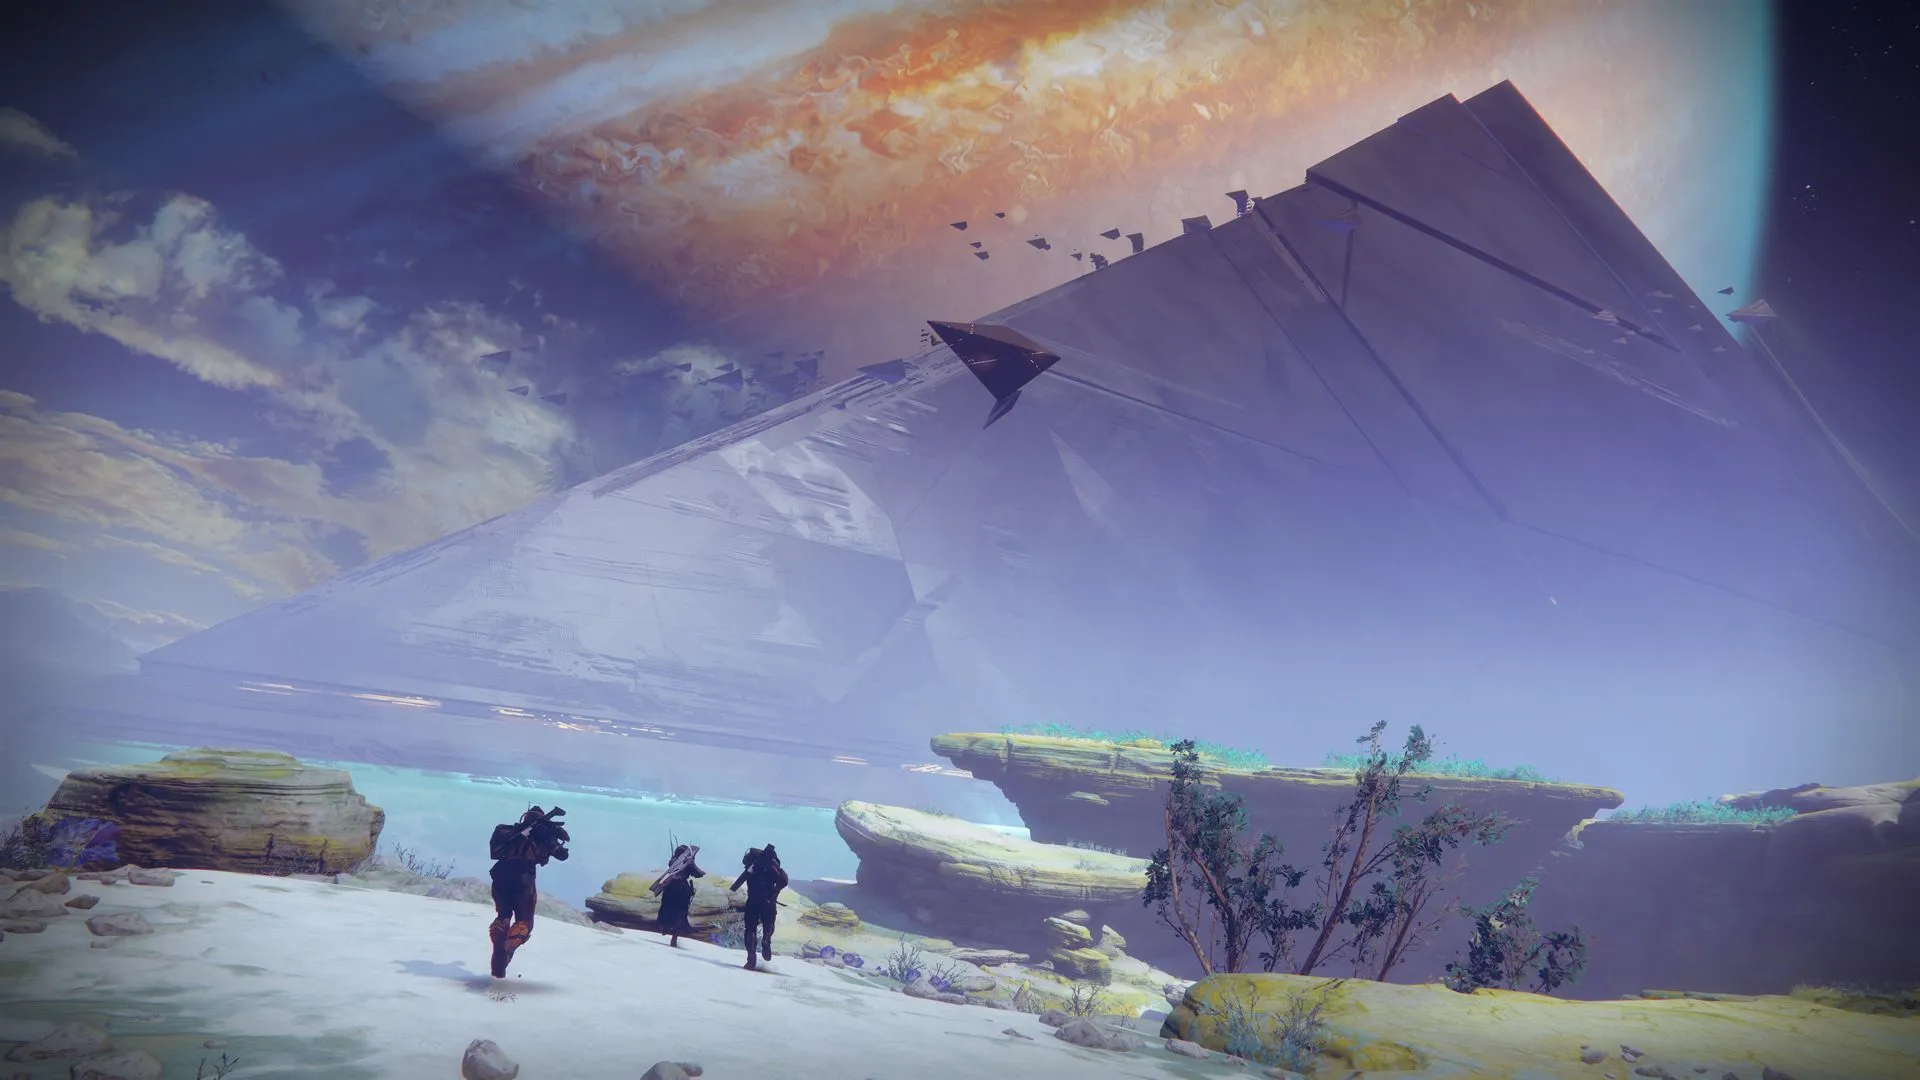 Bungie has published a new trailer for the Lightfall expansion for Destiny 2, which will launch in early 2023